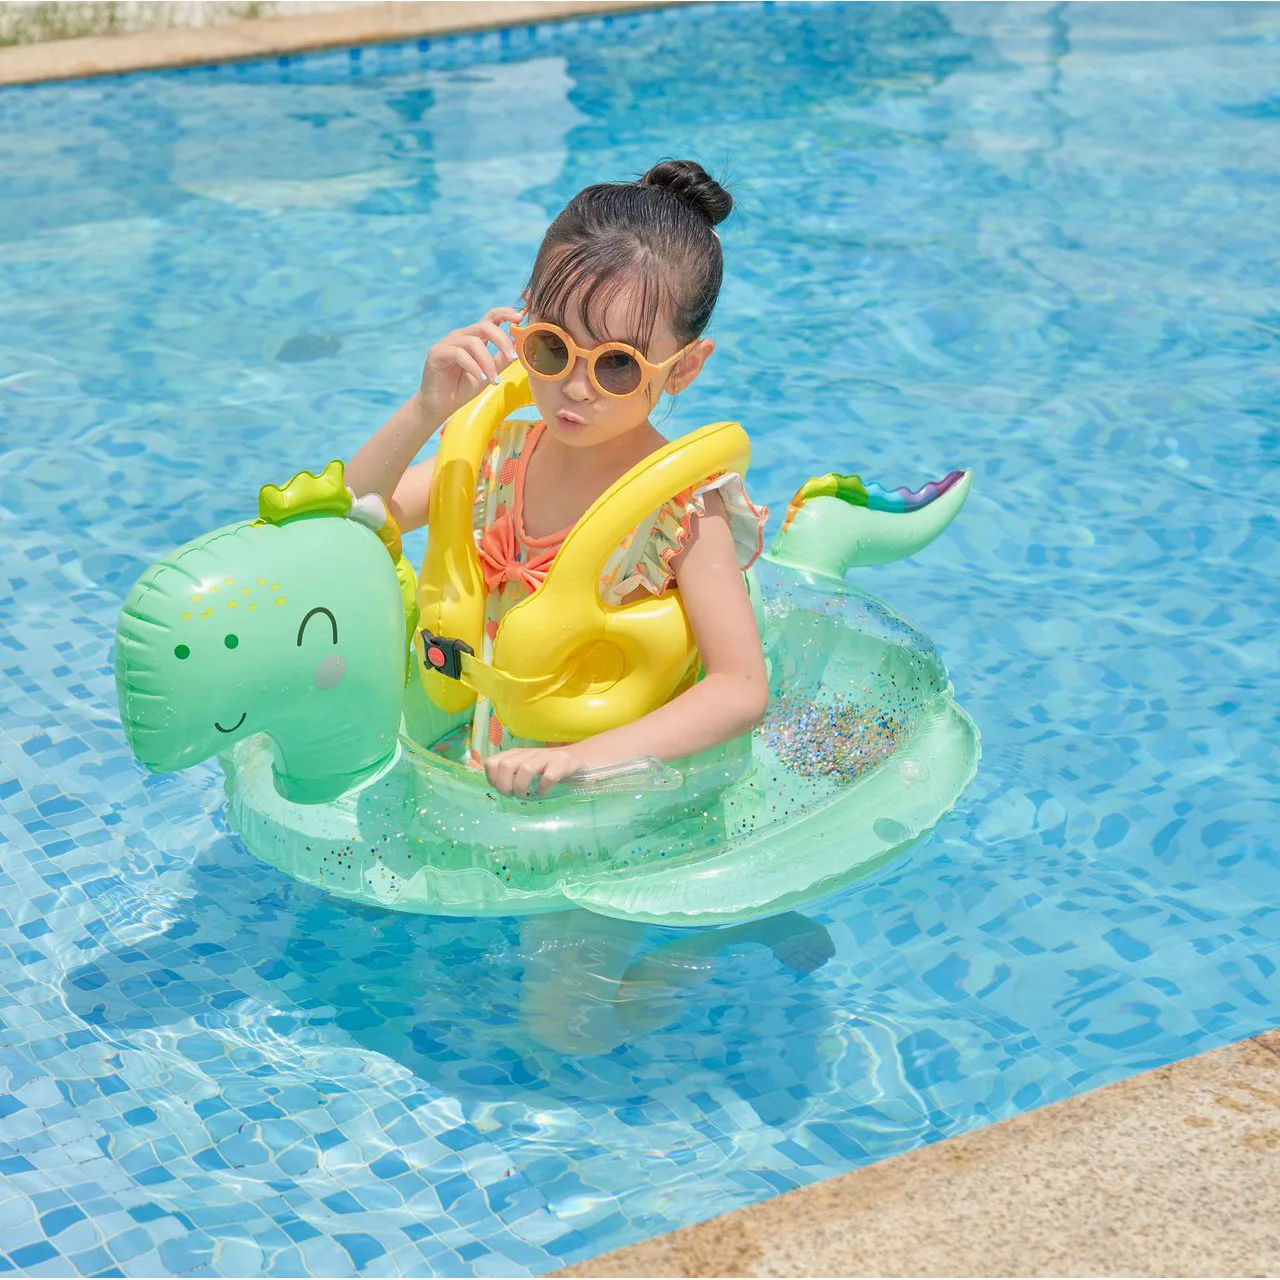 

ROOXIN Baby Swimming Ring Dinosaur Water Seat Inflatable Toys Float For Kids Swimming Circle Pool Bathtub Water Play Equipment